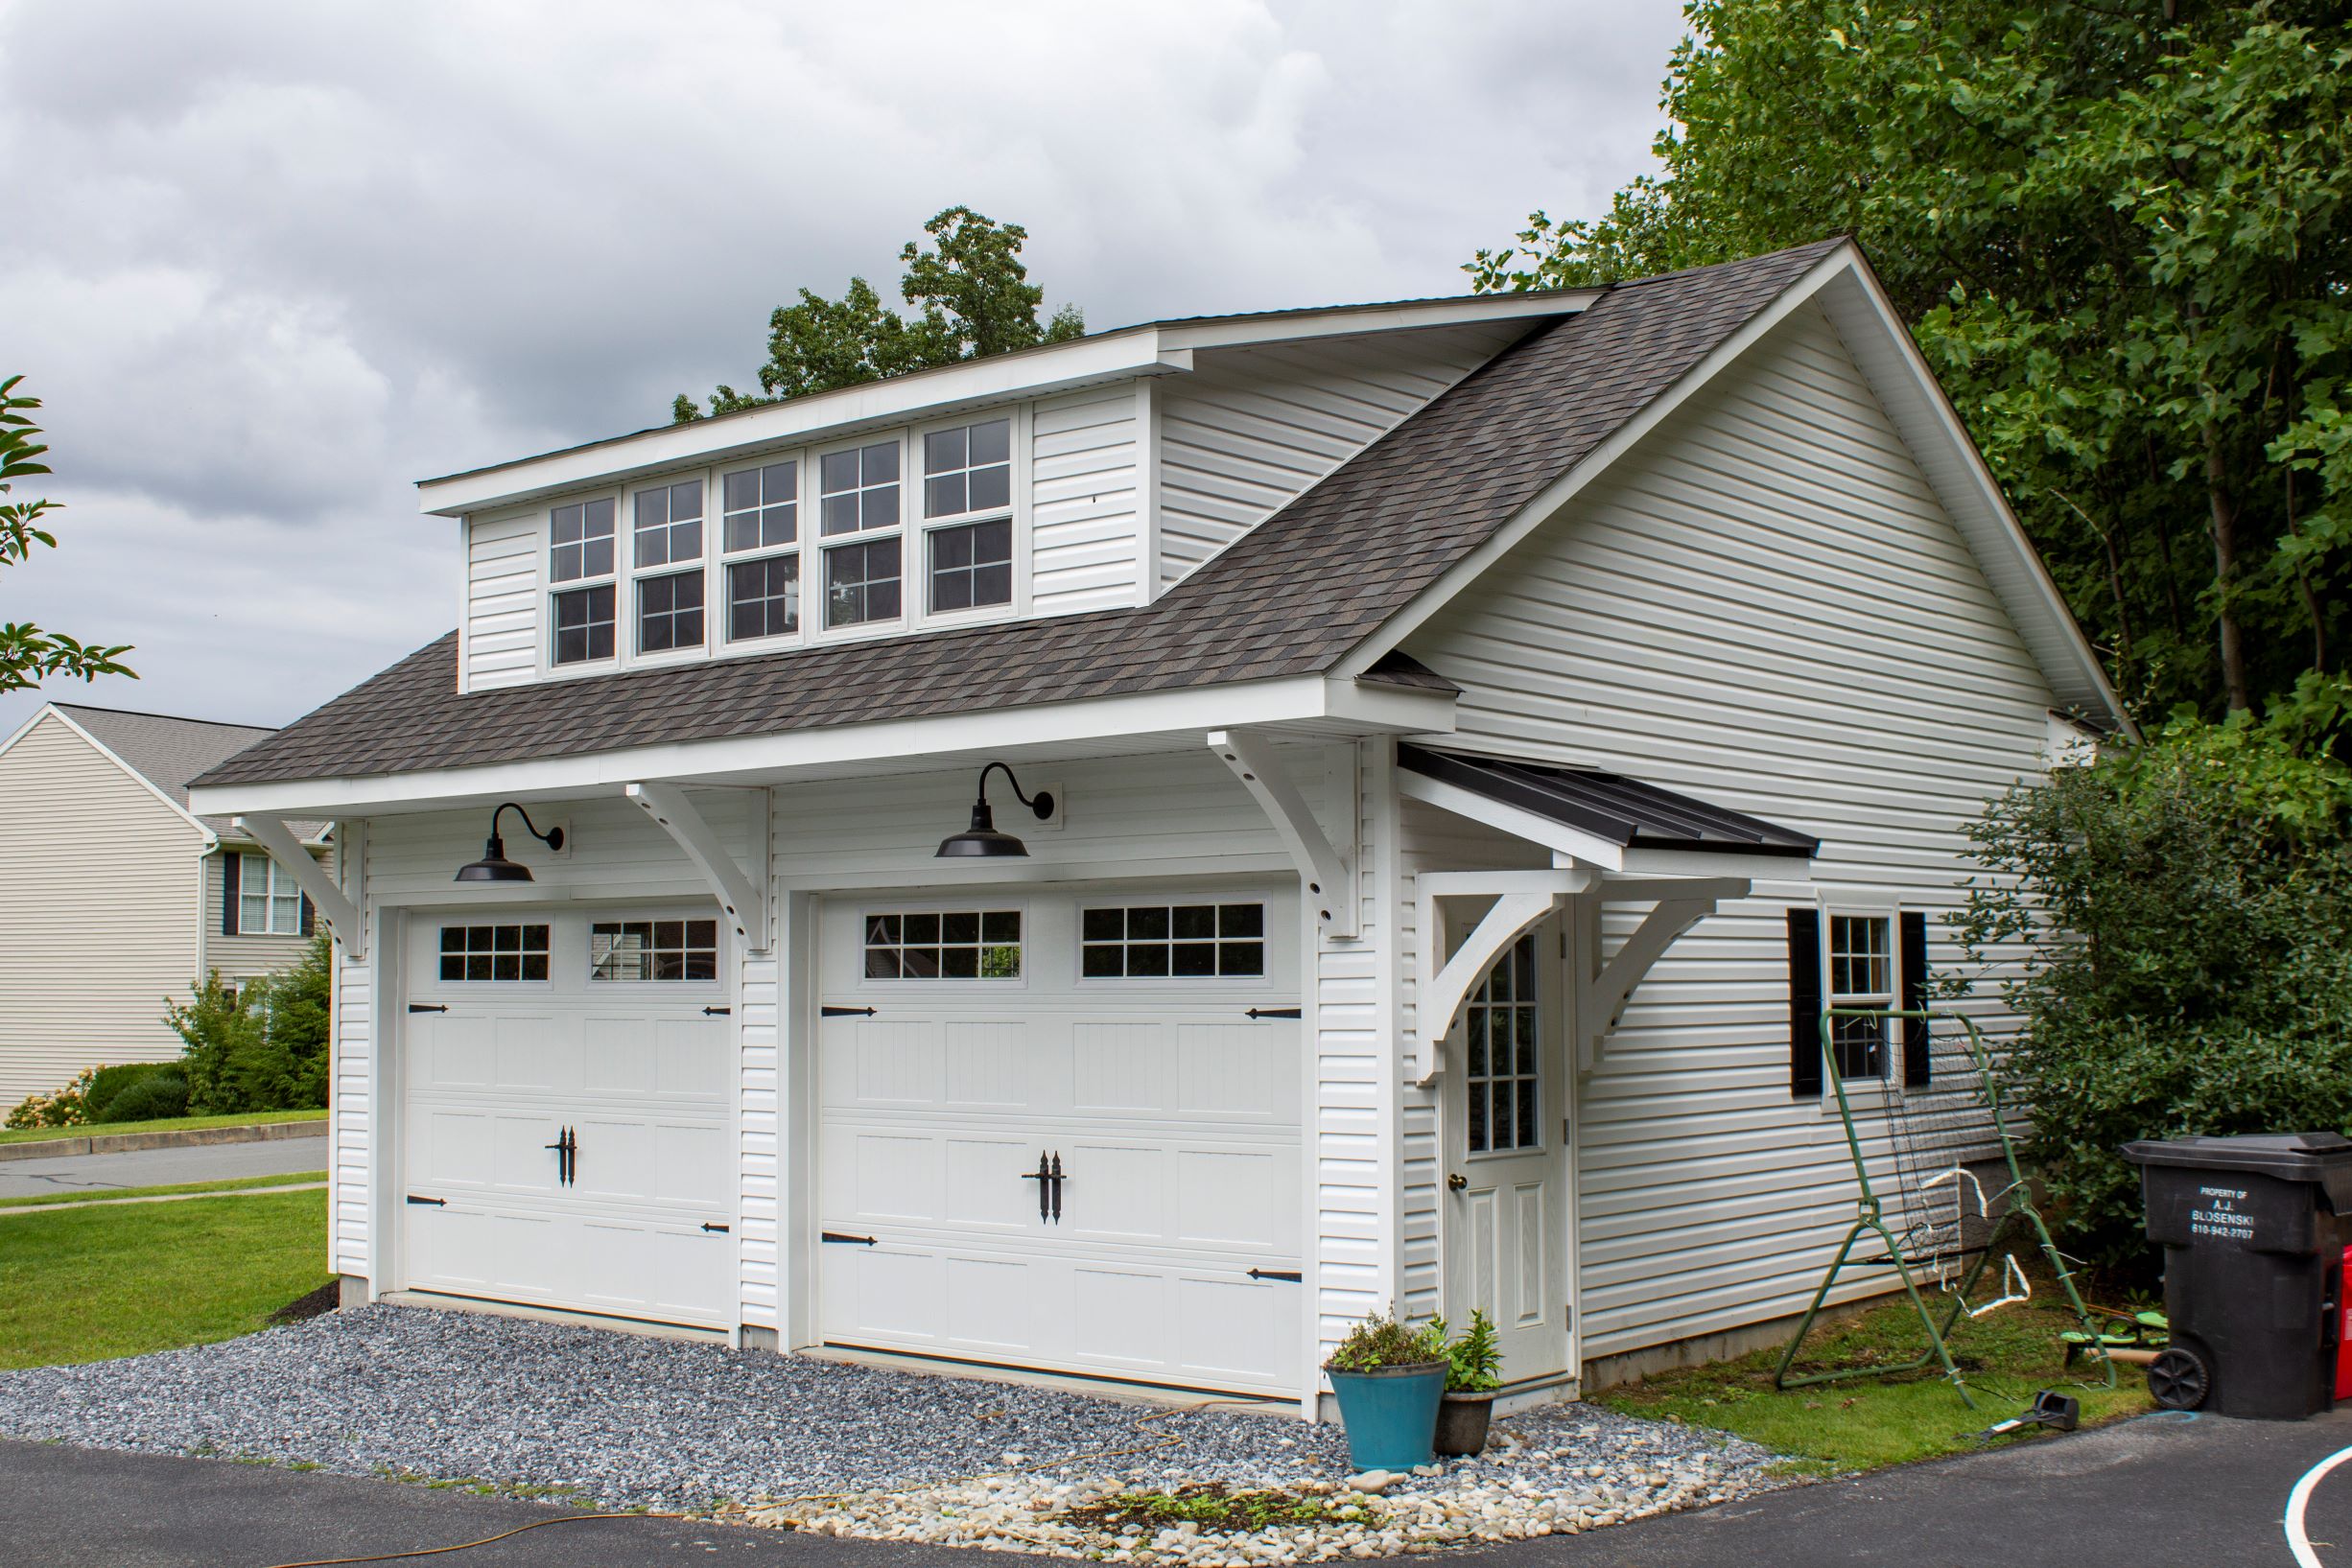 Exterior of a 2-story, 2-car Garden Shed Garage with white siding and white garage doors.